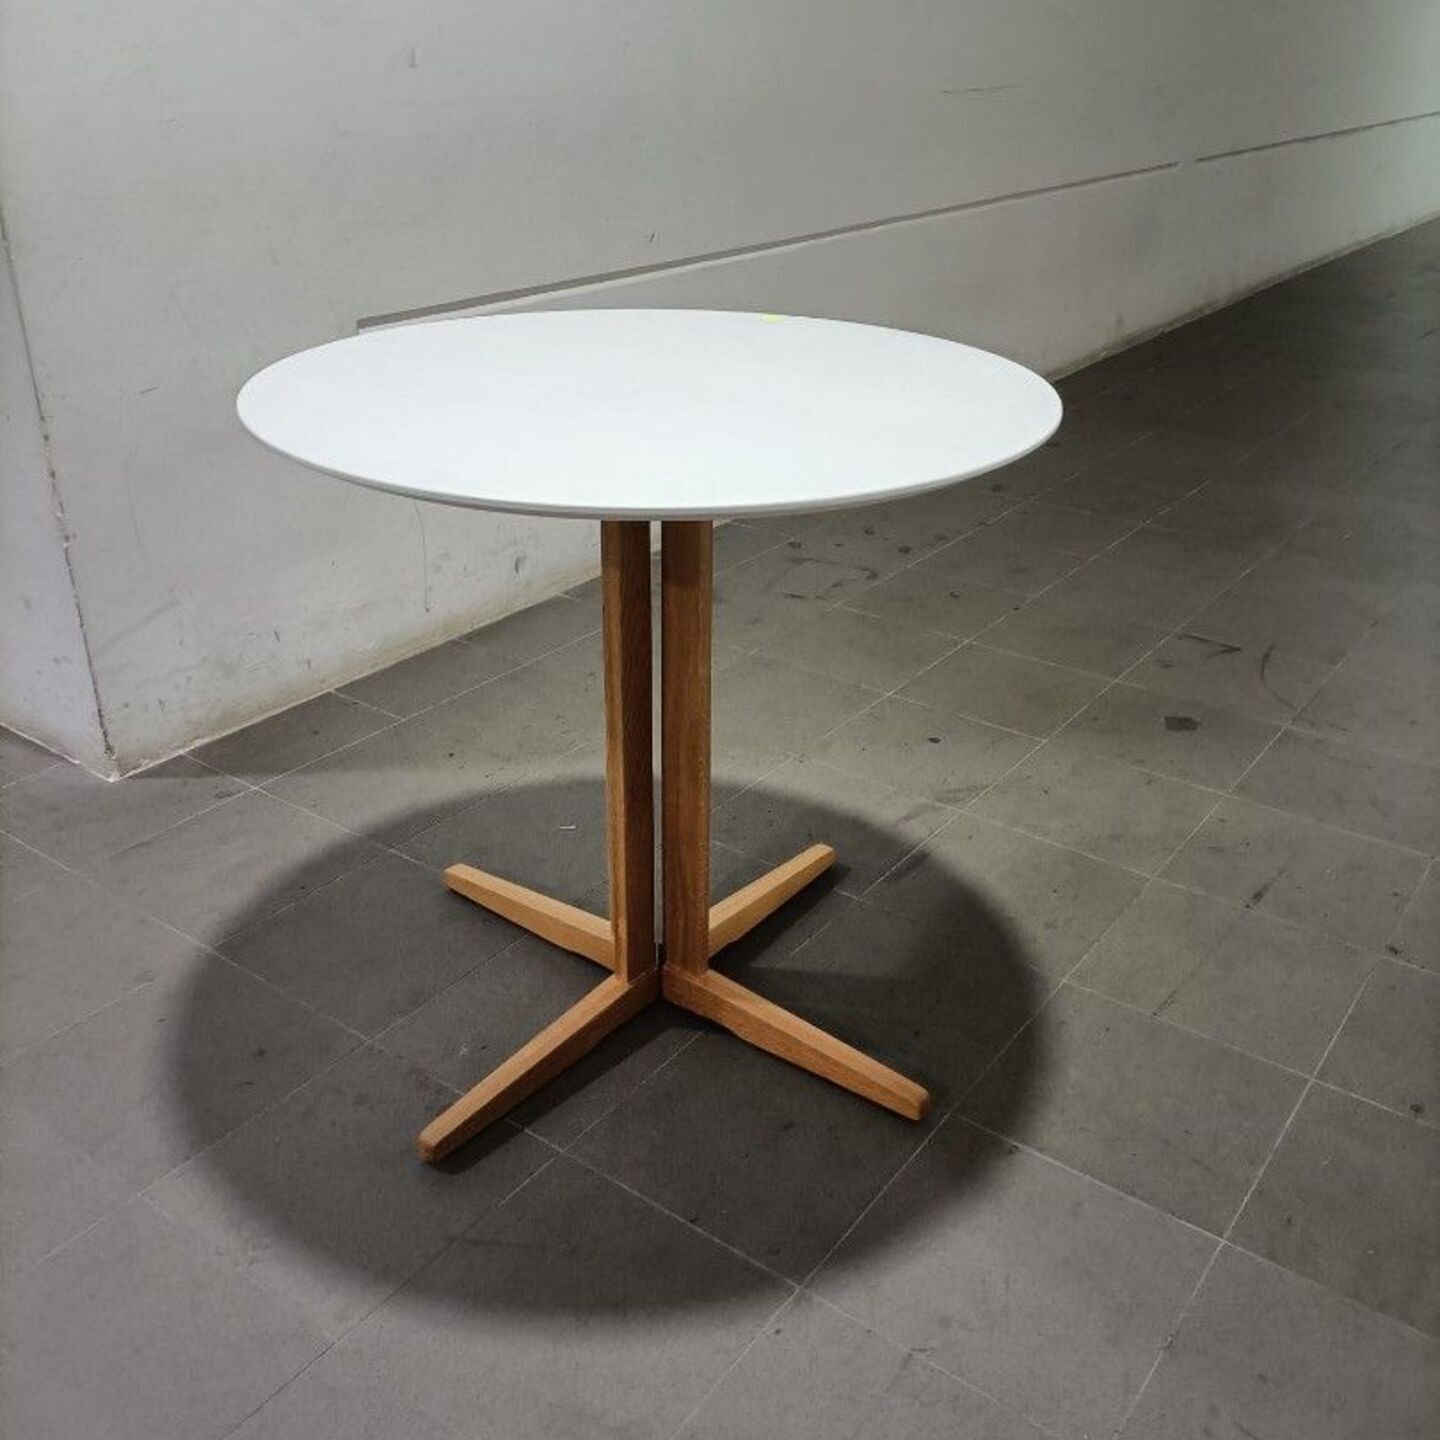 O'NEILL Round Dining Table in WHITE